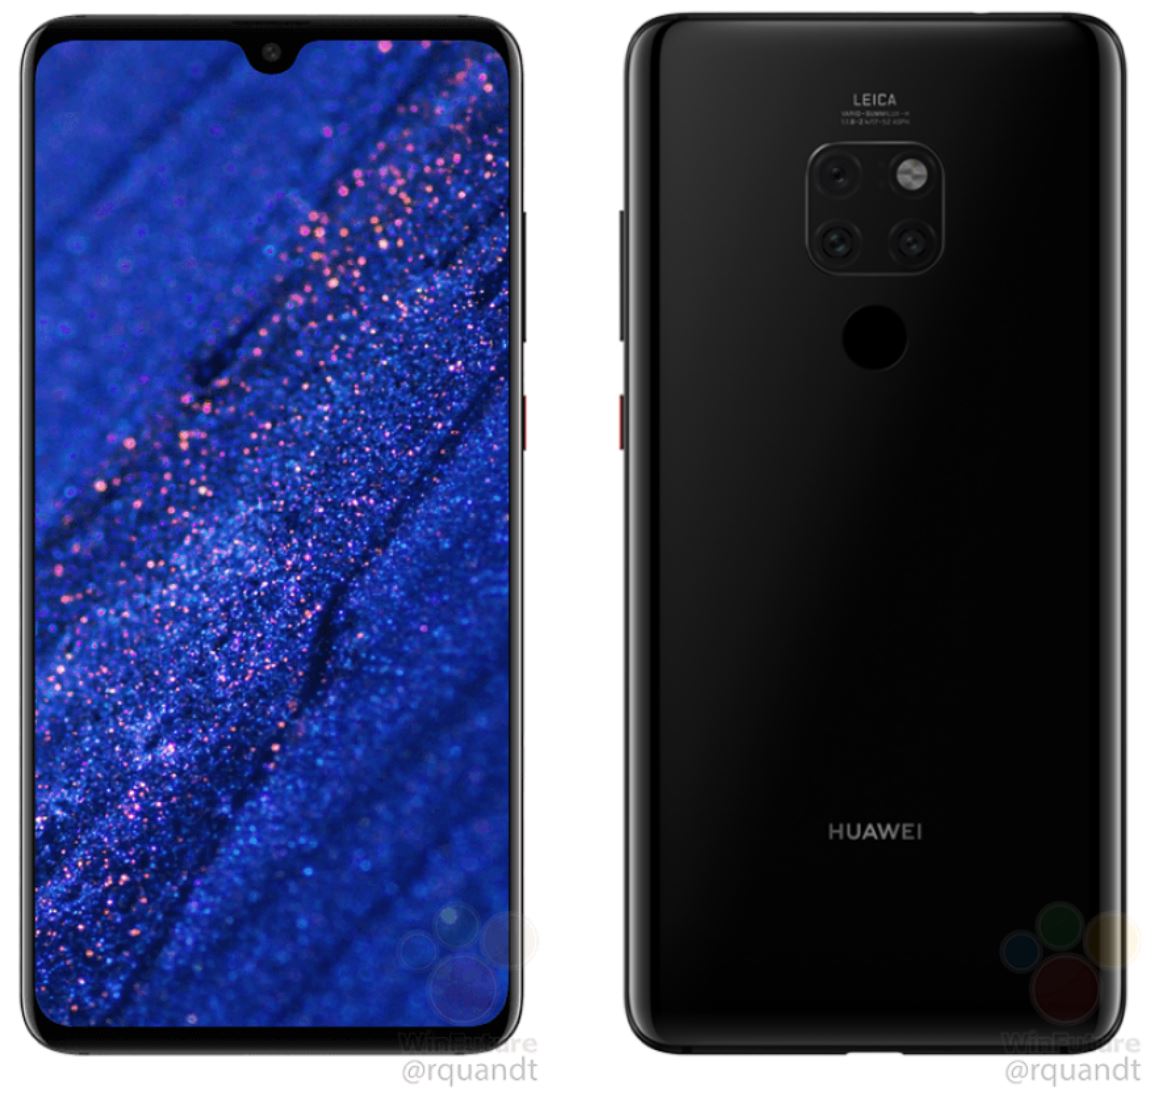 Huawei MATE 20 images 358576 2